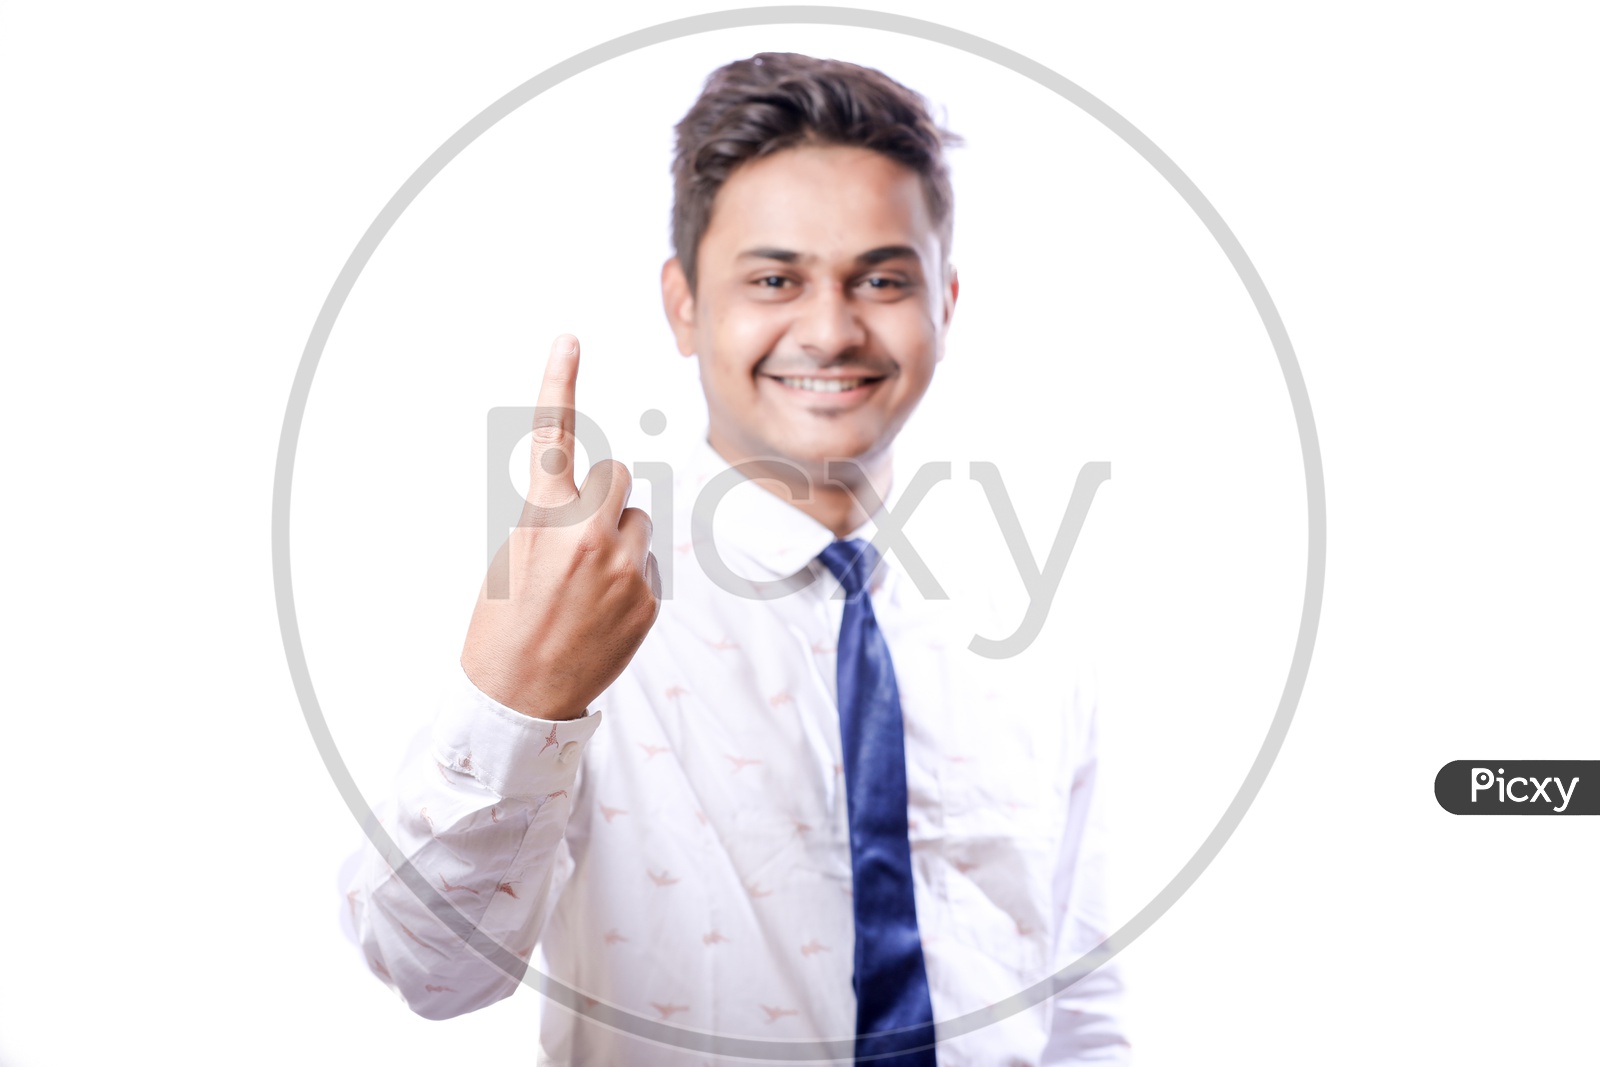 Portrait Of A Confident Youngman in Formalwear  With Expression and Showing to Space  With White  Background